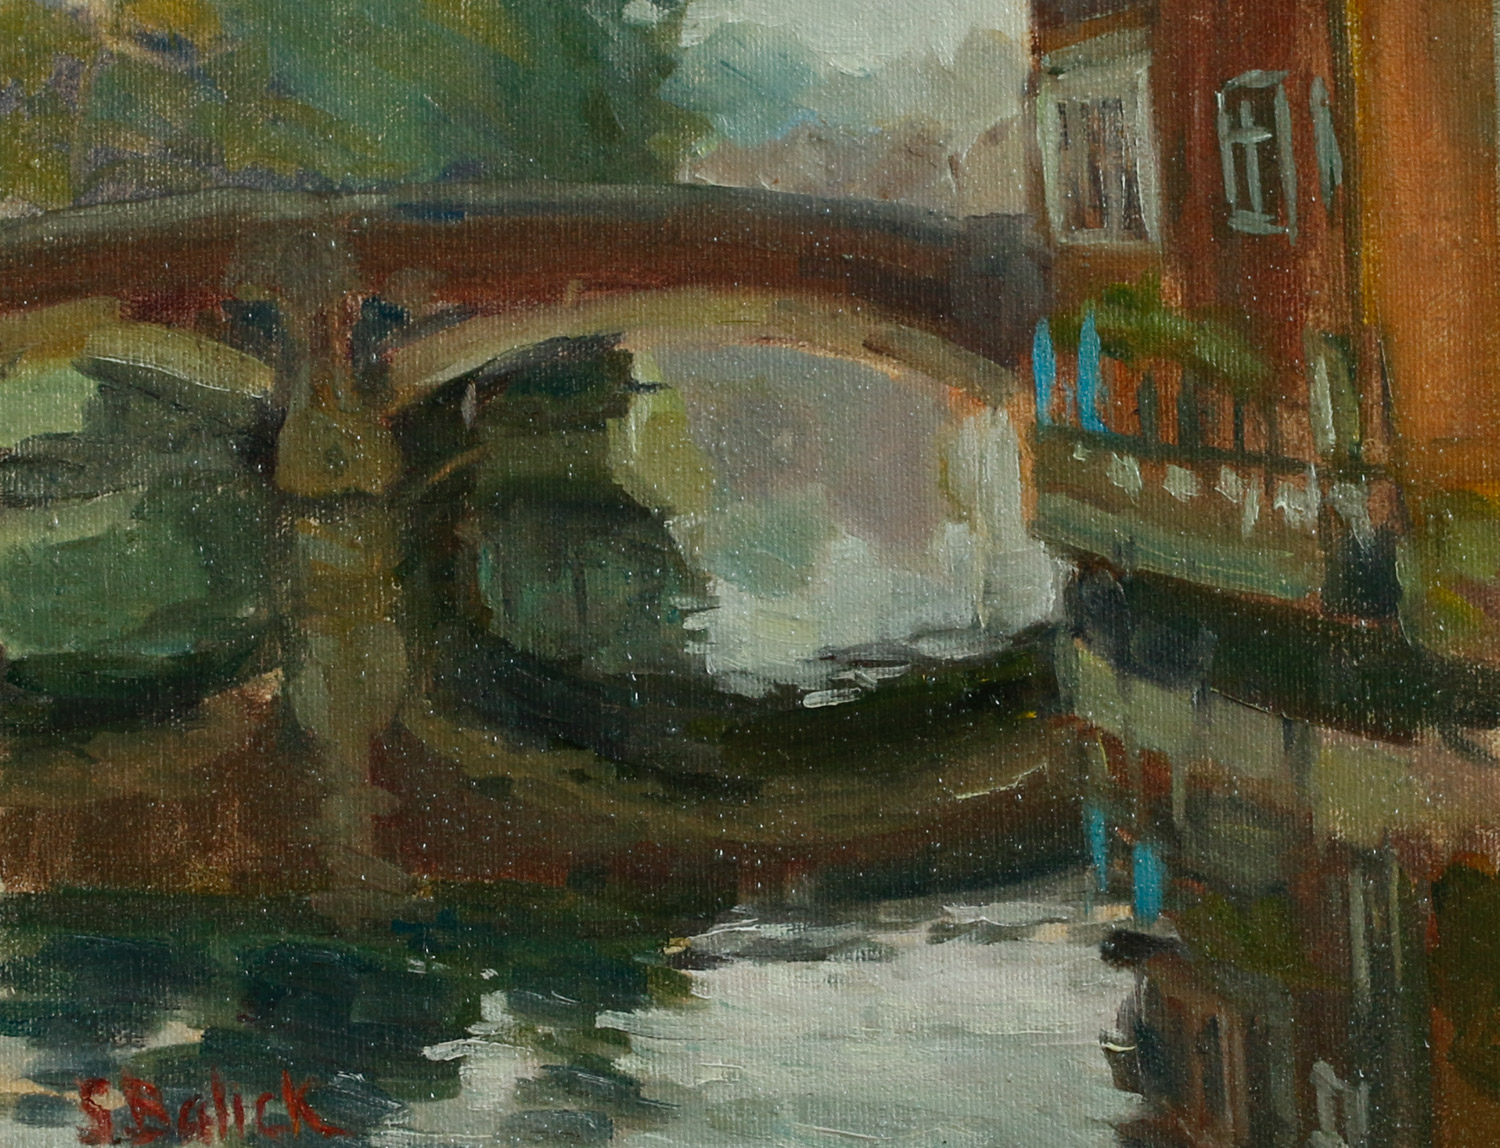 Artist Sally Balick - Rainy Day at Fye Bridge, £300 8x10 Oil on Board at Paint Out Norwich 2015